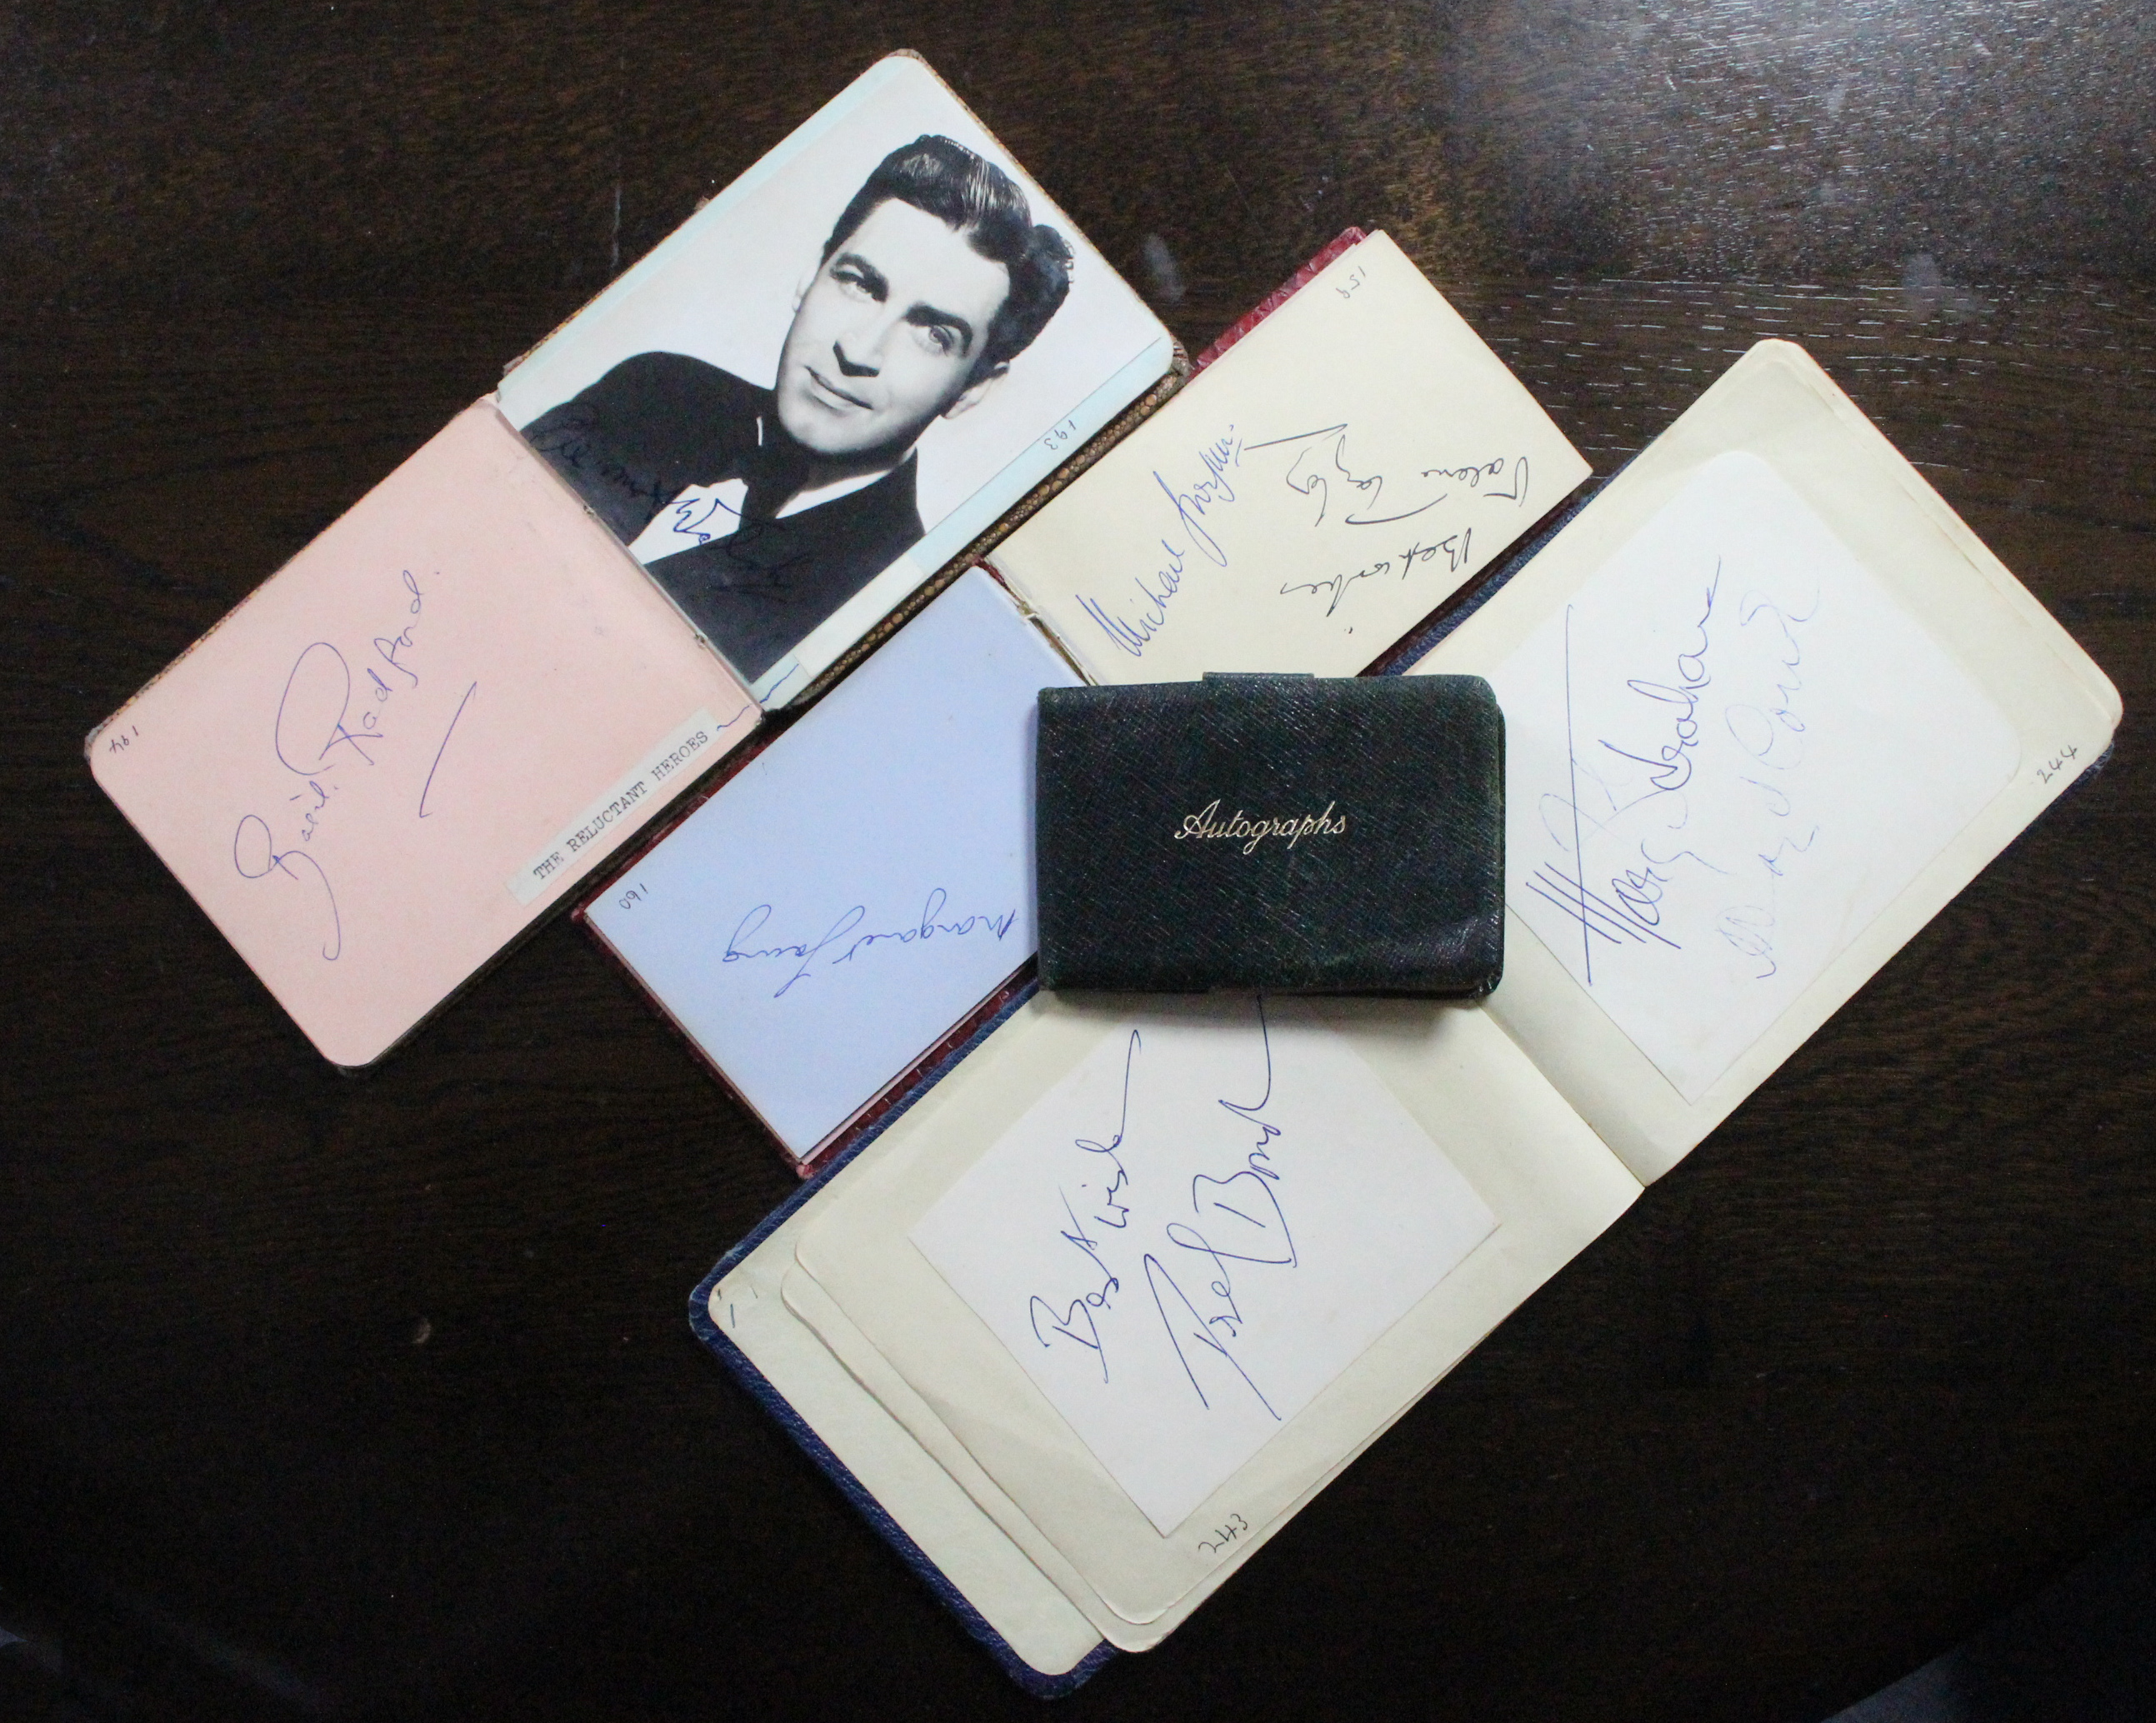 A THEATRICAL AUTOGRAPH COLLECTION in four small albums, of British stage actors from the 1950s